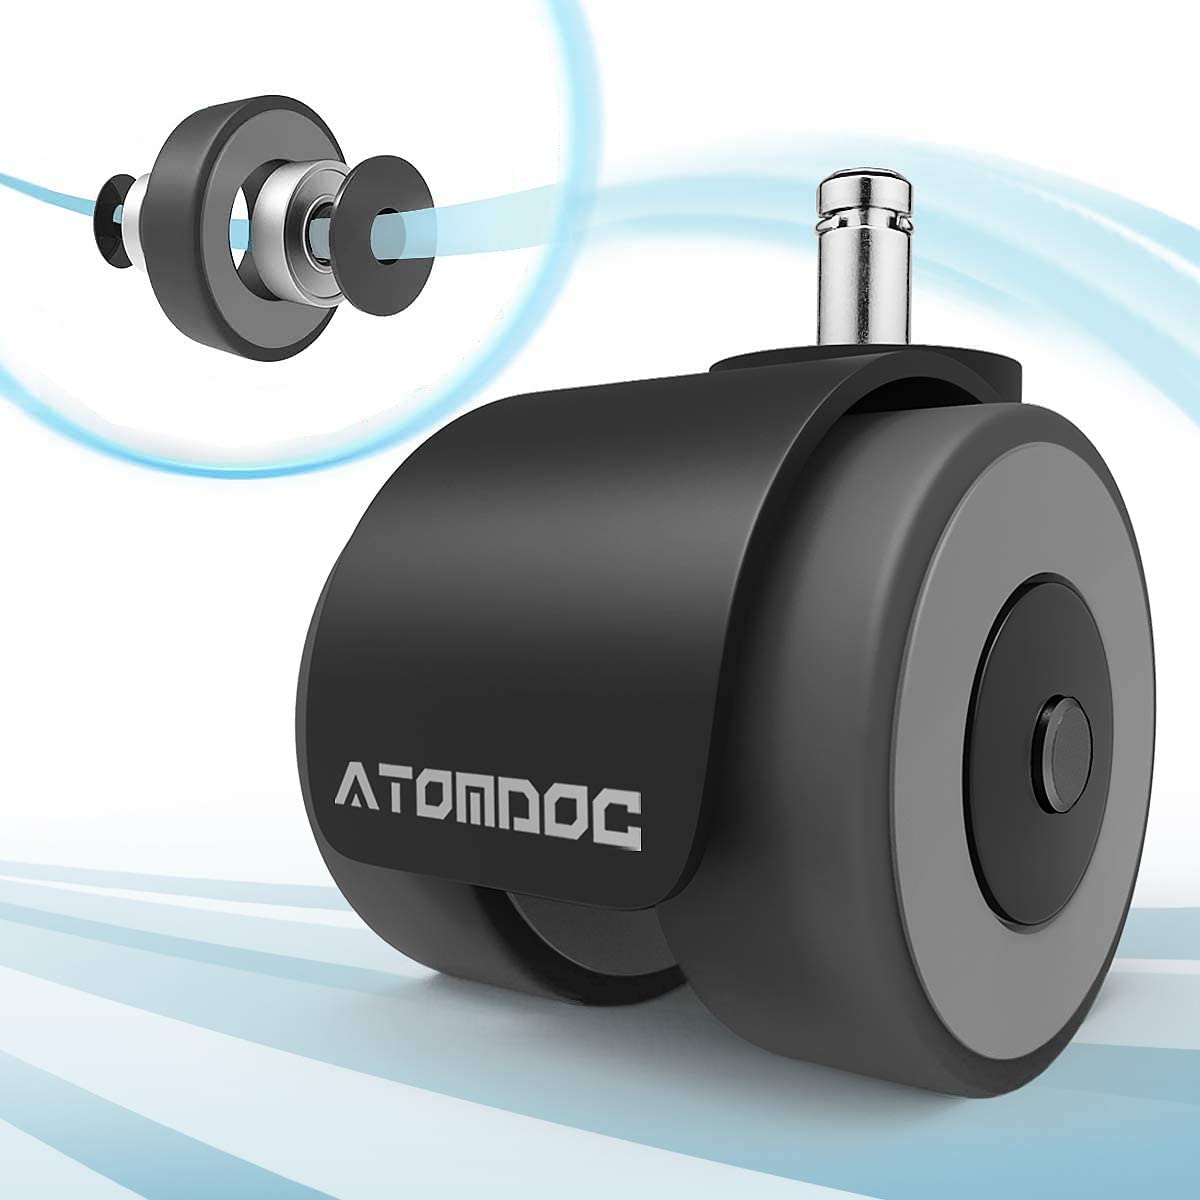 ATOMDOC office chair casters.